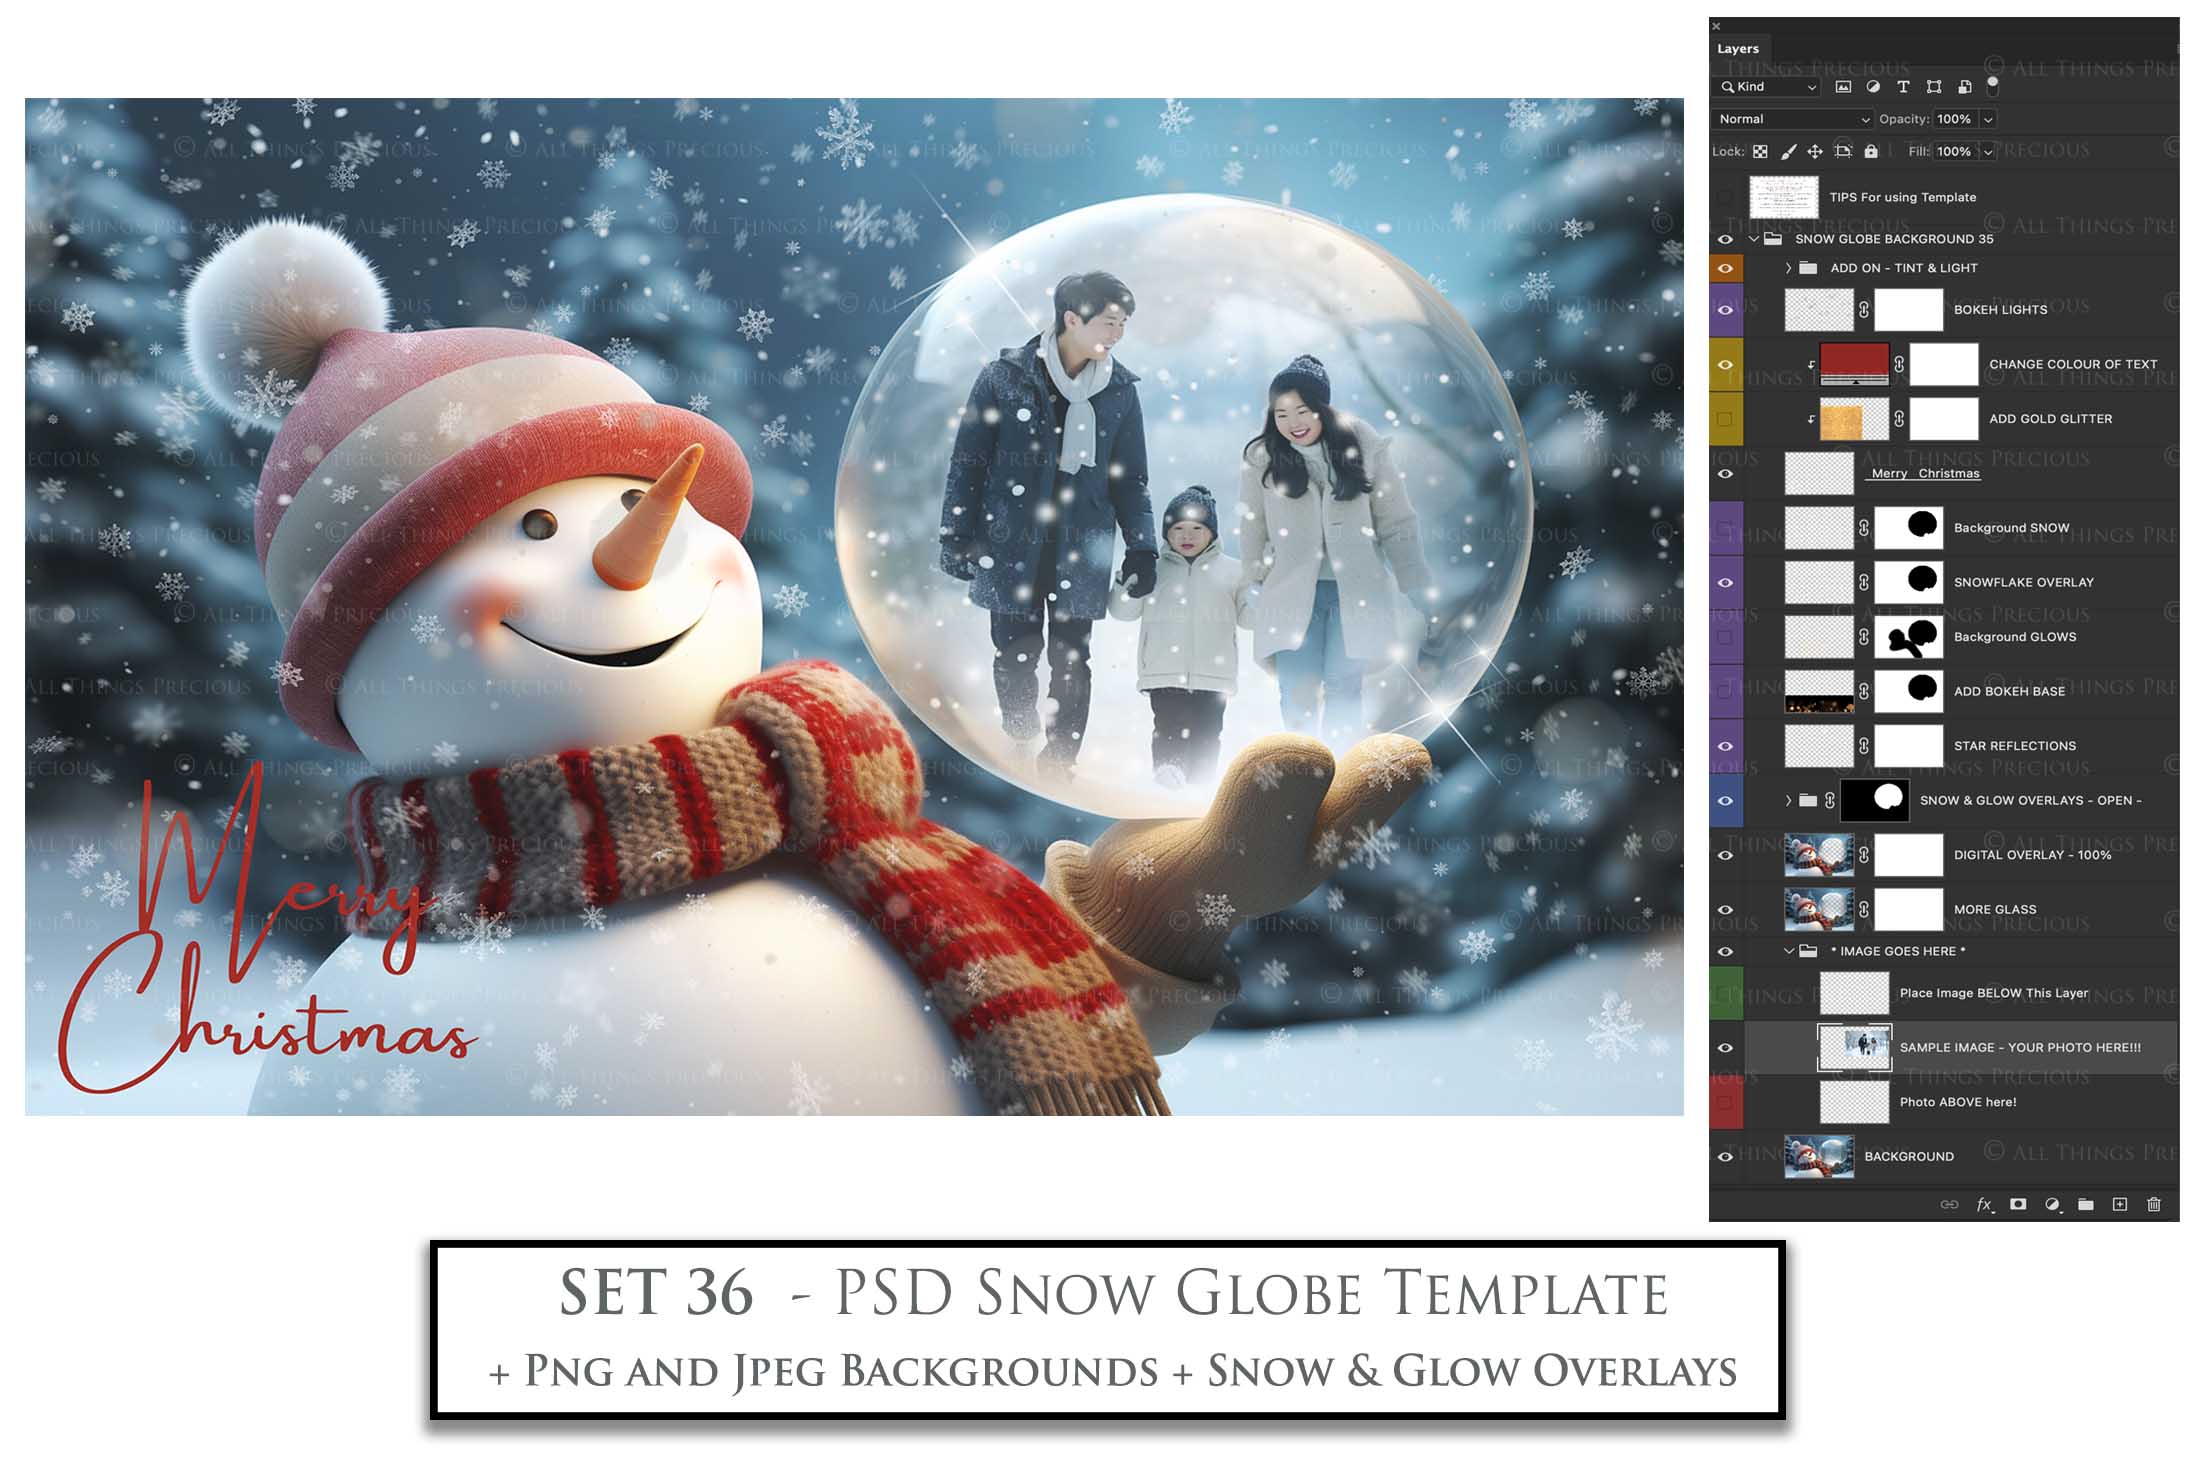 Digital Snow Globe Background, with Png snow overlays & PSD Template. The globe is transparent, perfect for adding your own images and retain the glass effect.The file is 6000 x 4000, 300dpi. Png Included. Use for Christmas edits, Photography, Card Crafts, Scrapbooking. Xmas Backdrops. Snowman holding a glass ball.